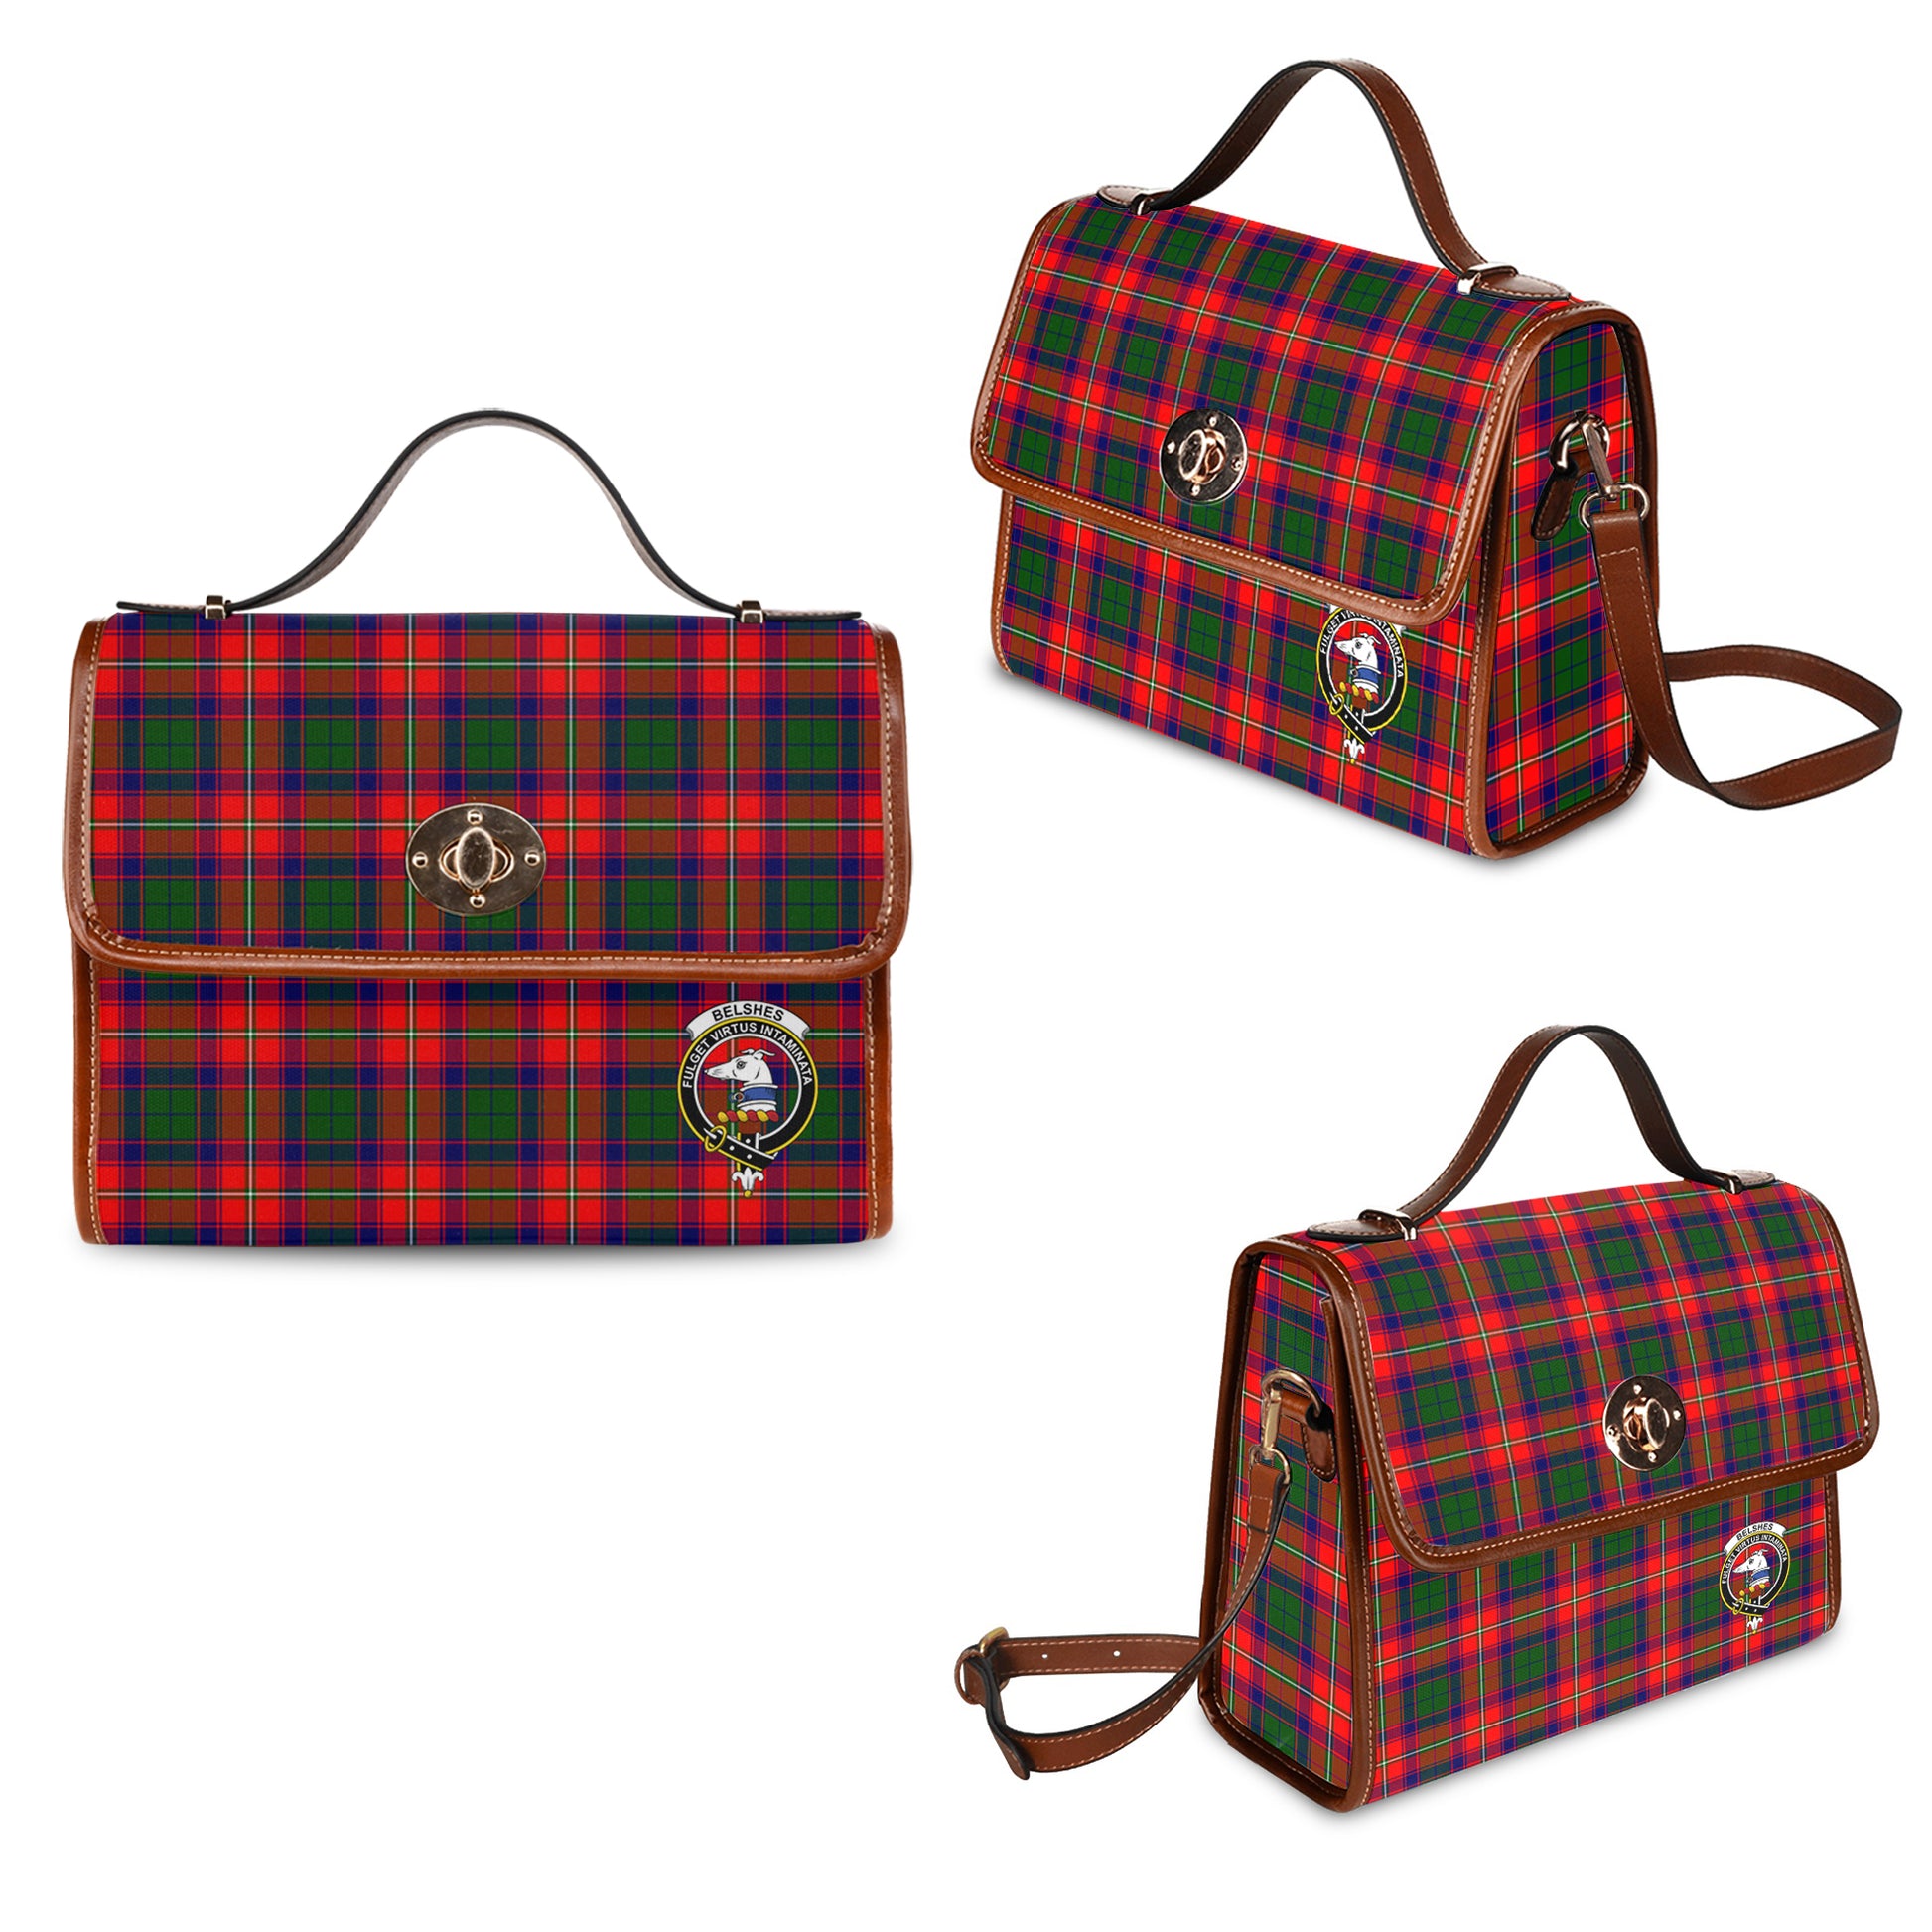 Belshes Tartan Leather Strap Waterproof Canvas Bag with Family Crest One Size 34cm * 42cm (13.4" x 16.5") - Tartanvibesclothing